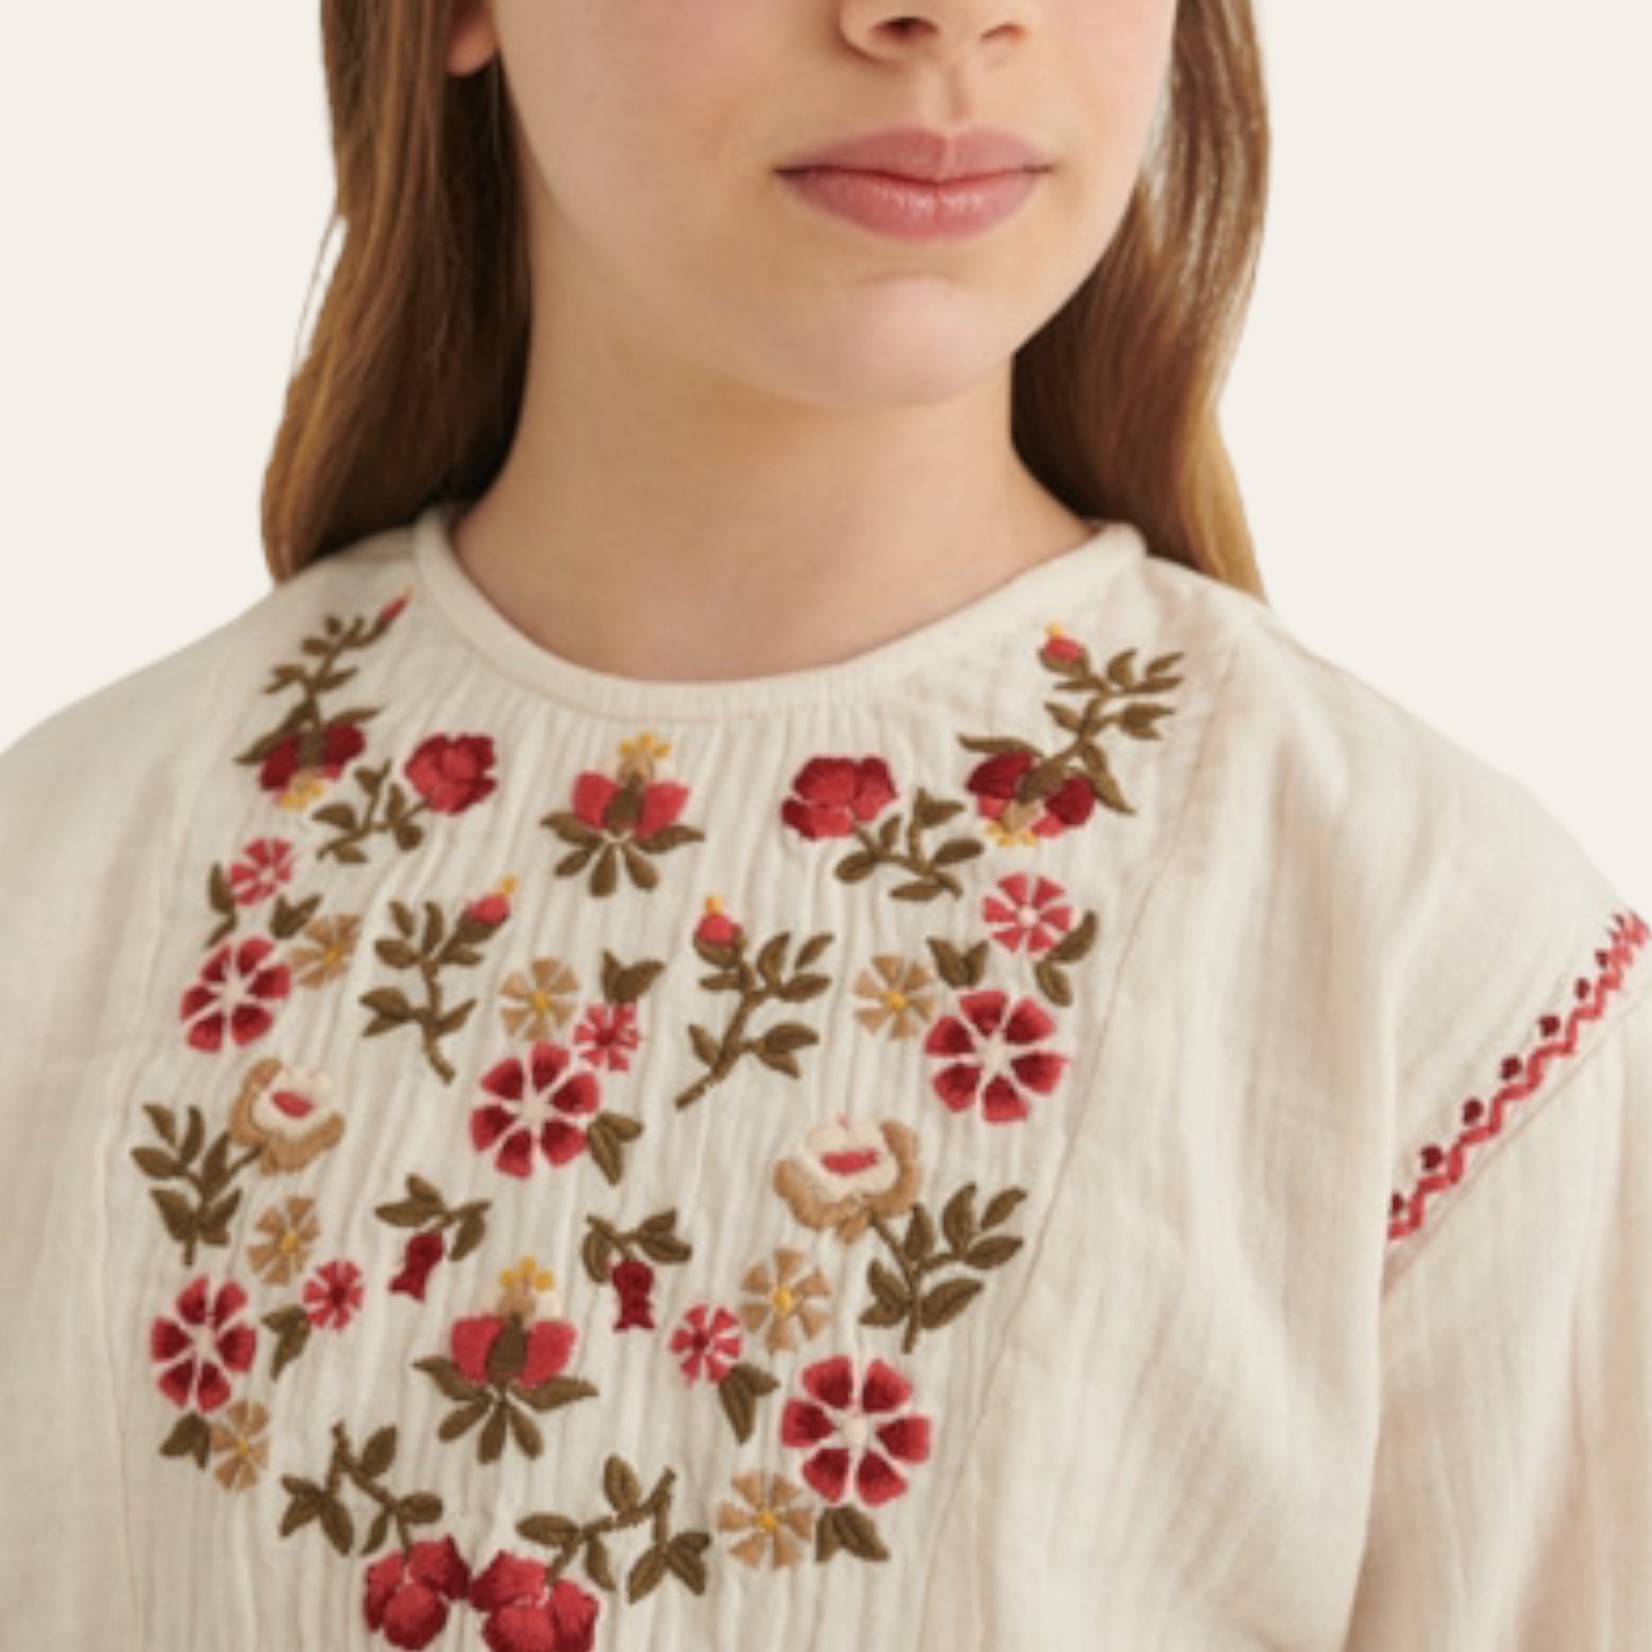 https://cdn.shoplightspeed.com/shops/622907/files/48865747/1652x1652x1/mayoral-chickpea-embroidered-blouse-22-883.jpg